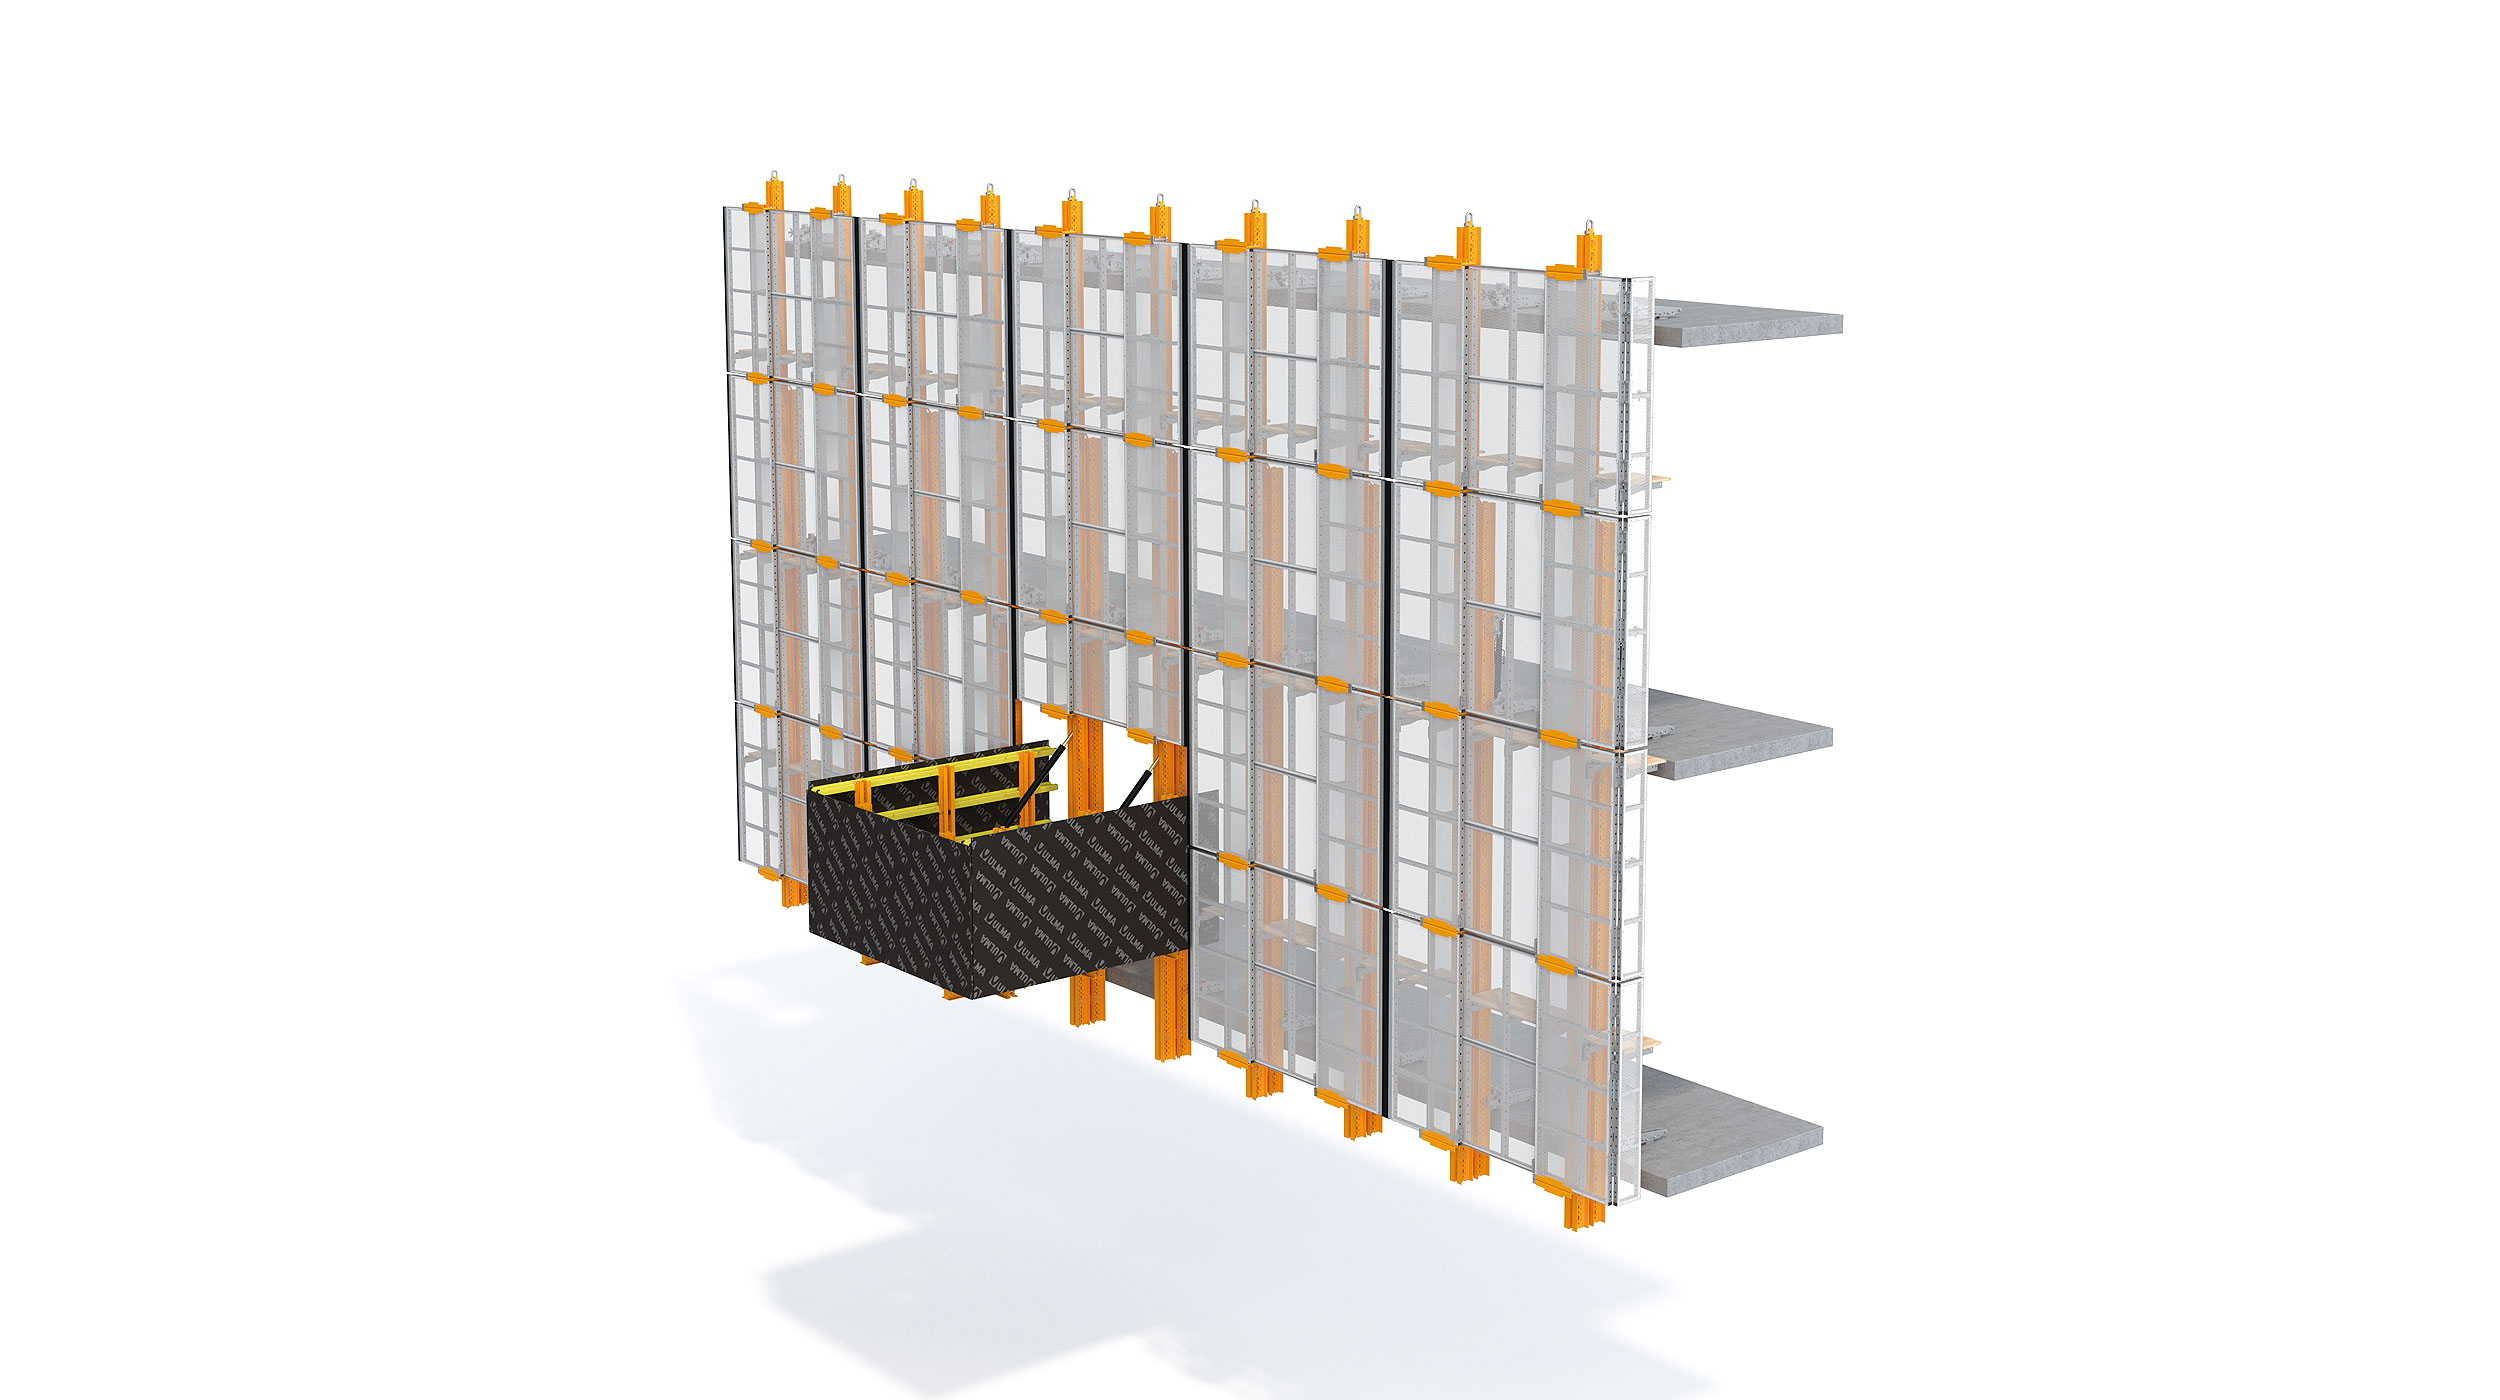 Perimeter Safety Screen adaptable to different geometries and configurations depending on project requirements. Designed for high-rise buildings.